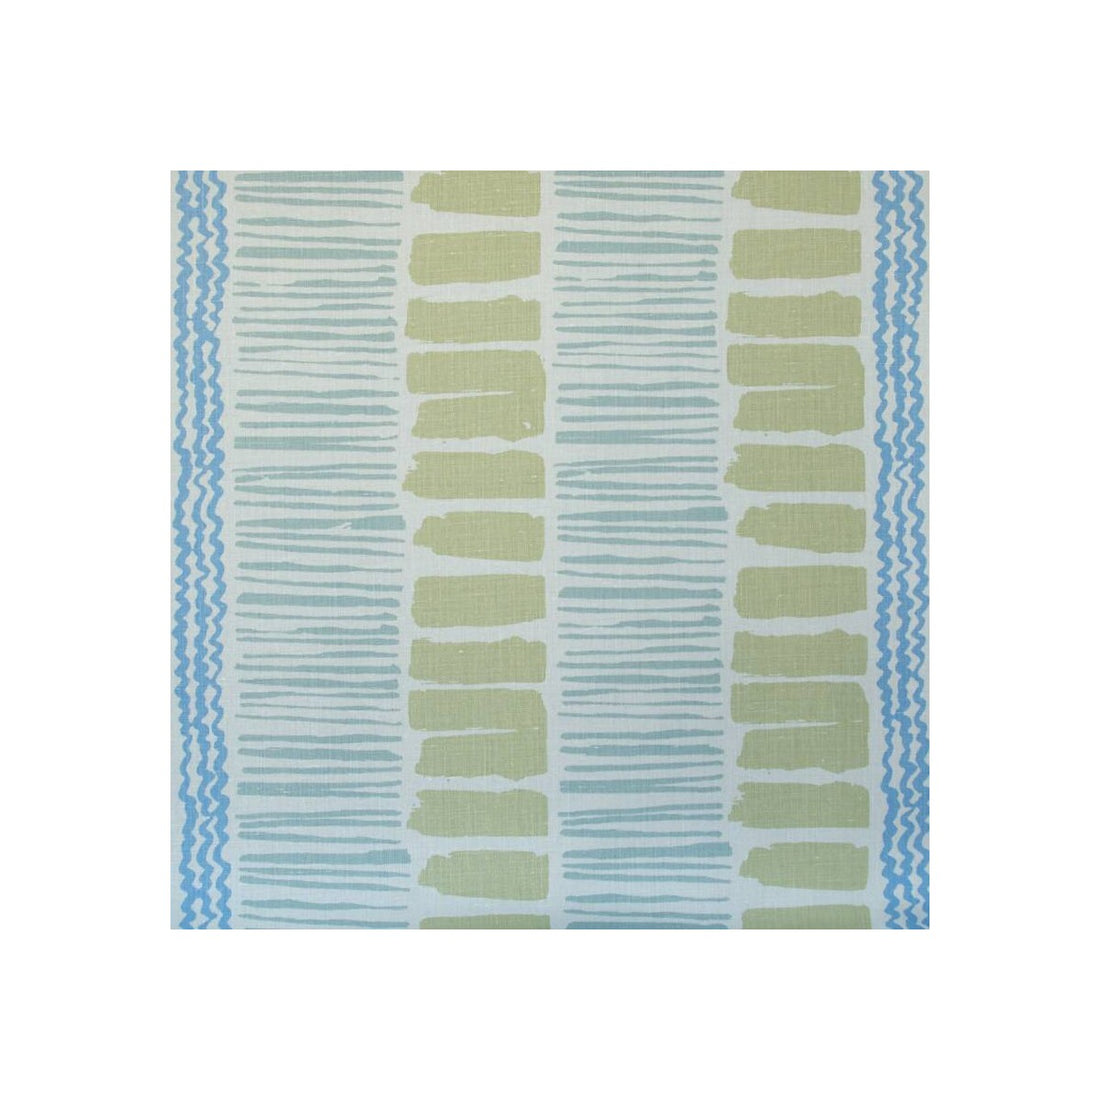 Saltaire fabric in light green/aqua/cornflower color - pattern BFC-3624.315.0 - by Lee Jofa in the Blithfield collection